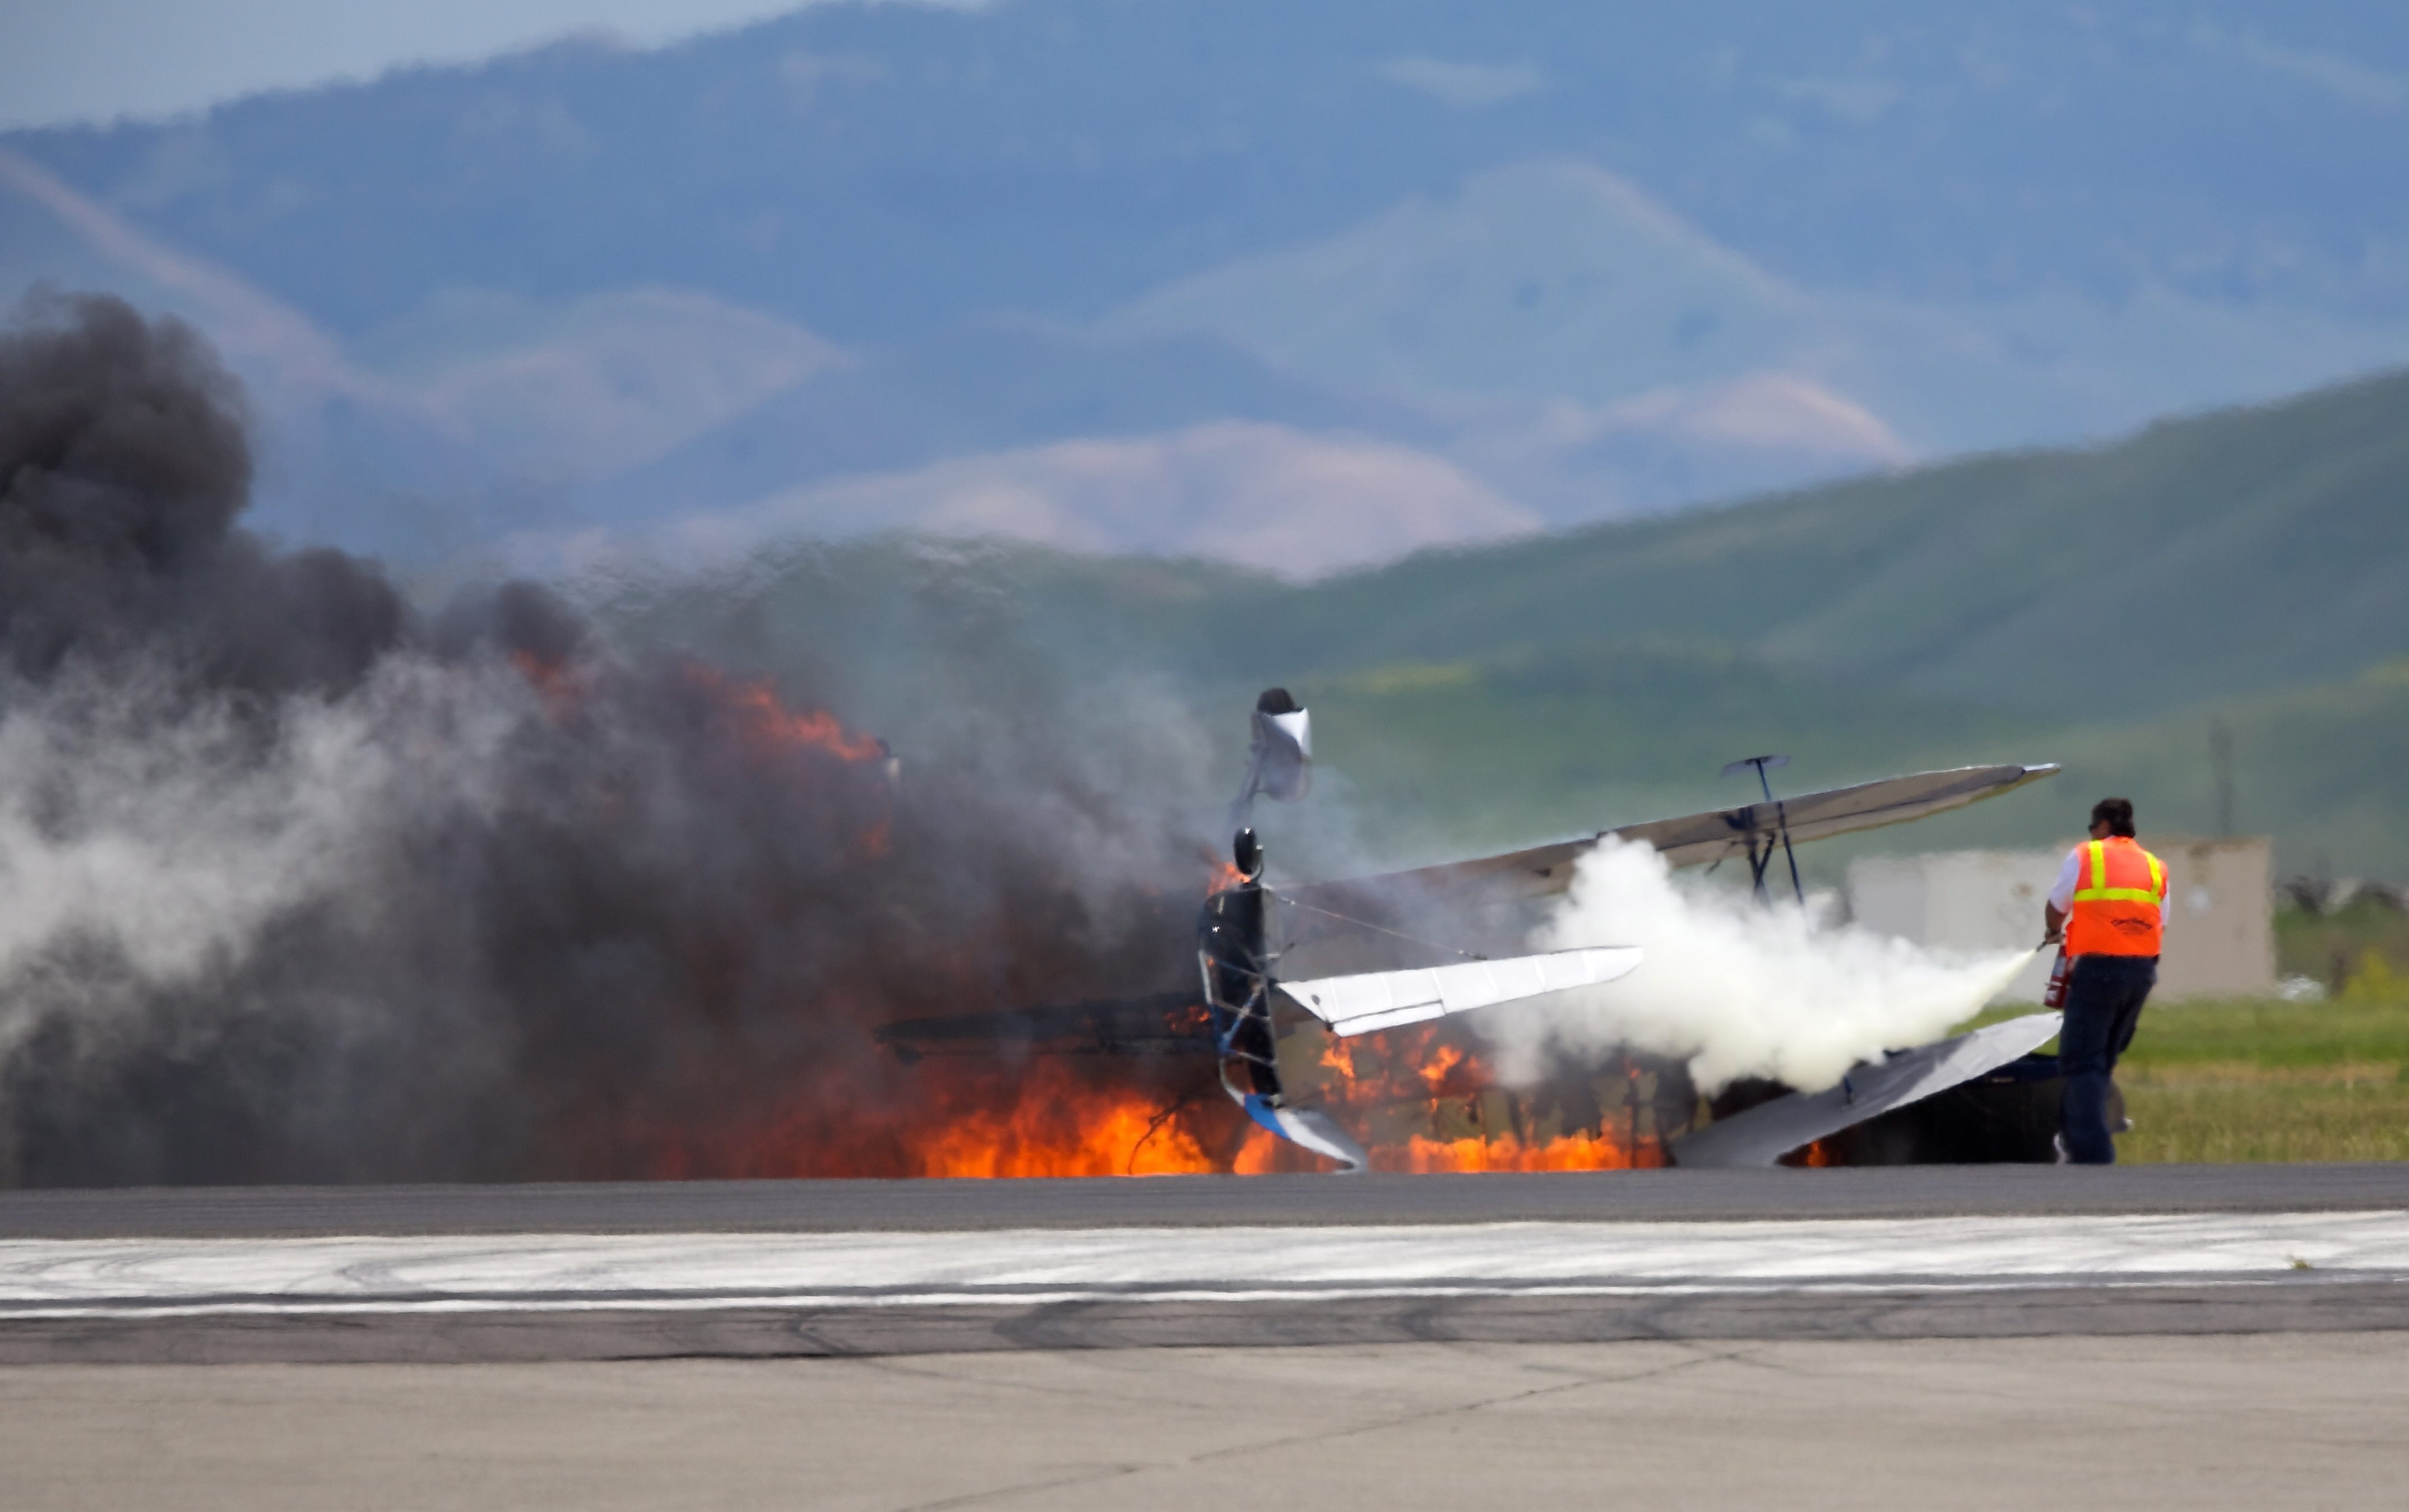 A worker fights a fire after a vintage biplane crashed upside-down on a runway at an air show at Travis Air Force Base in Fairfield, Calif., on Sunday.